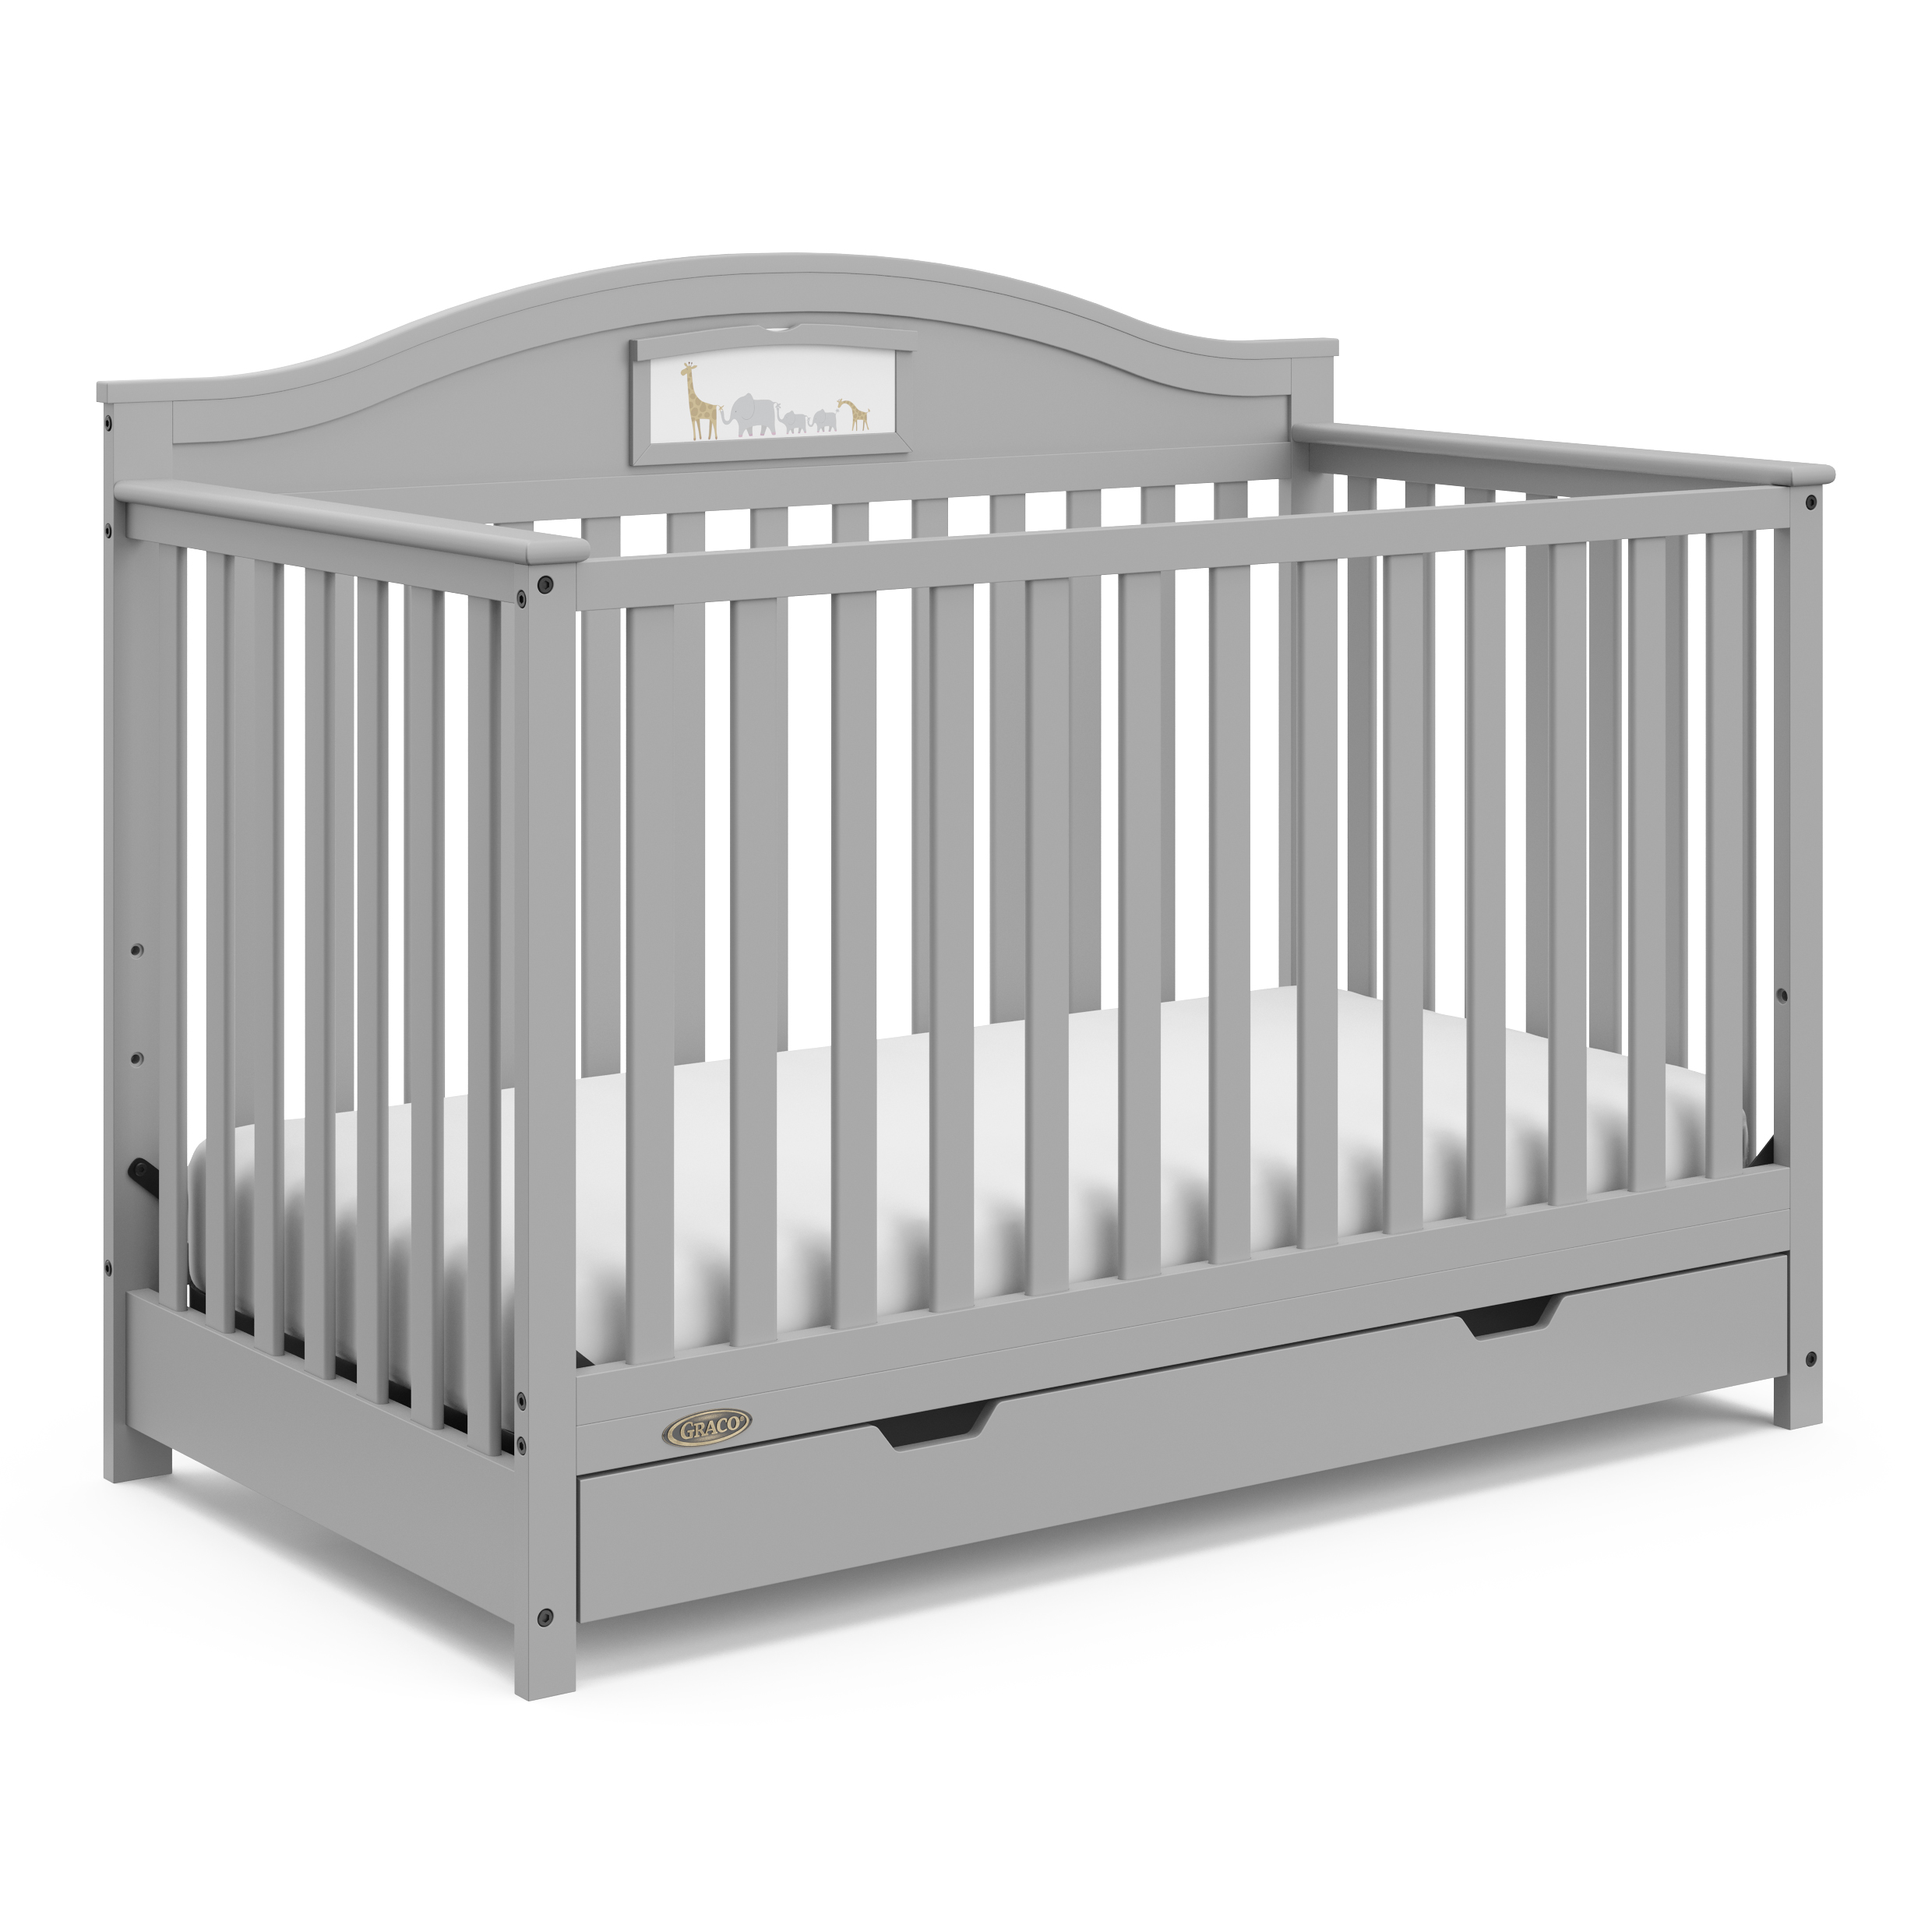 Graco Story 5-in-1 Convertible Baby Crib with Drawer, Pebble Gray - image 1 of 28